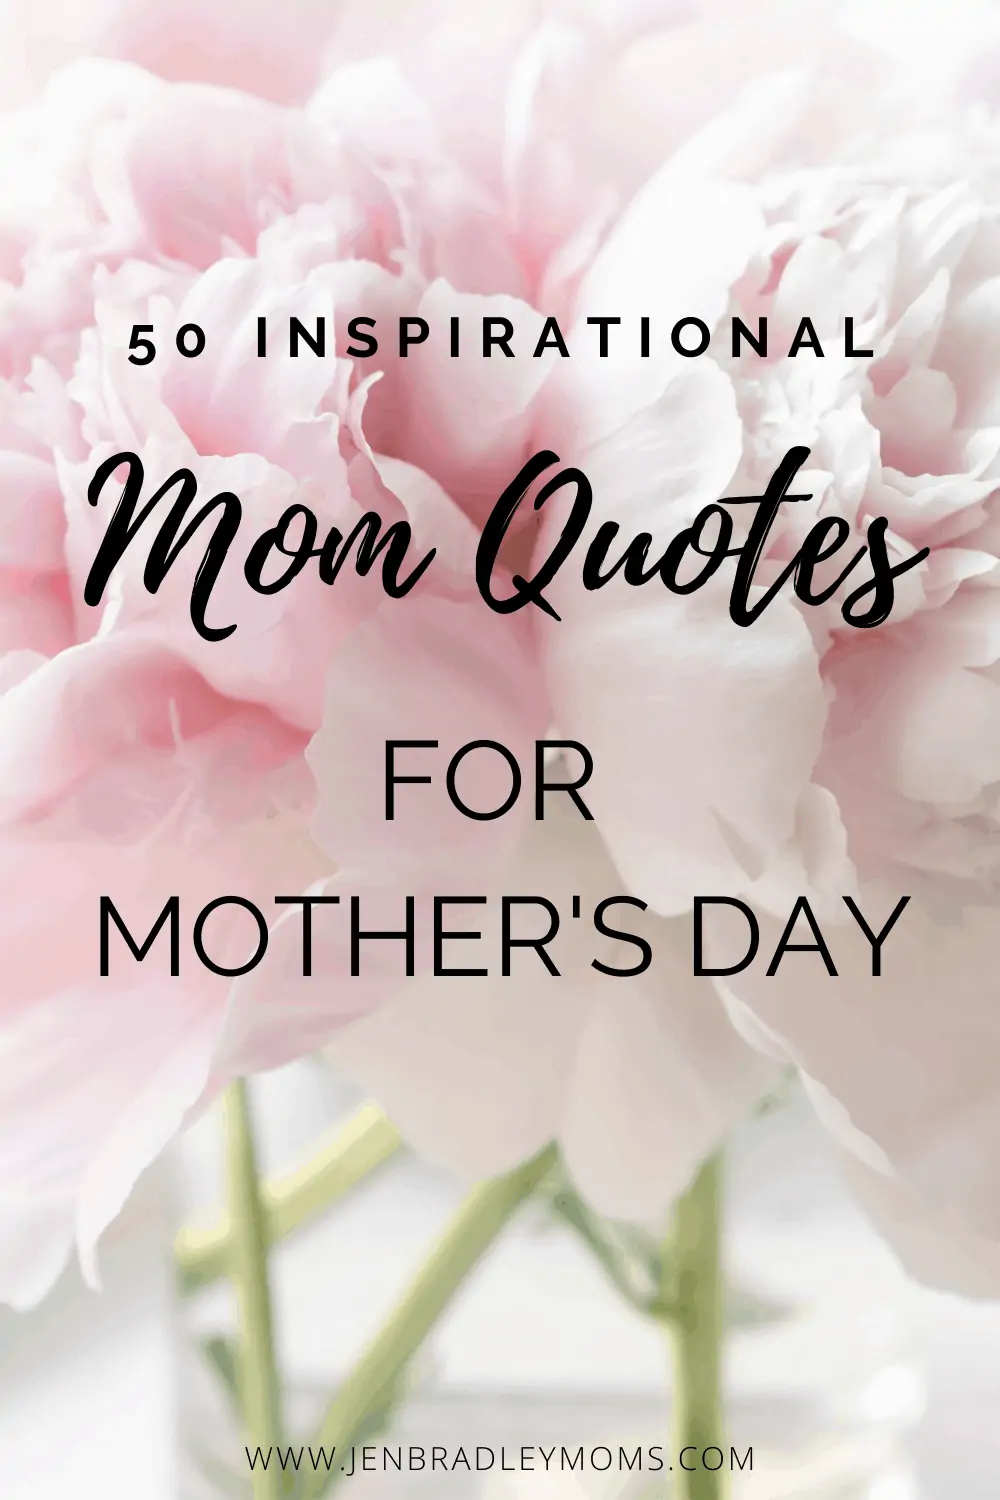 55+ Beautiful and Inspirational Quotes for Mothers